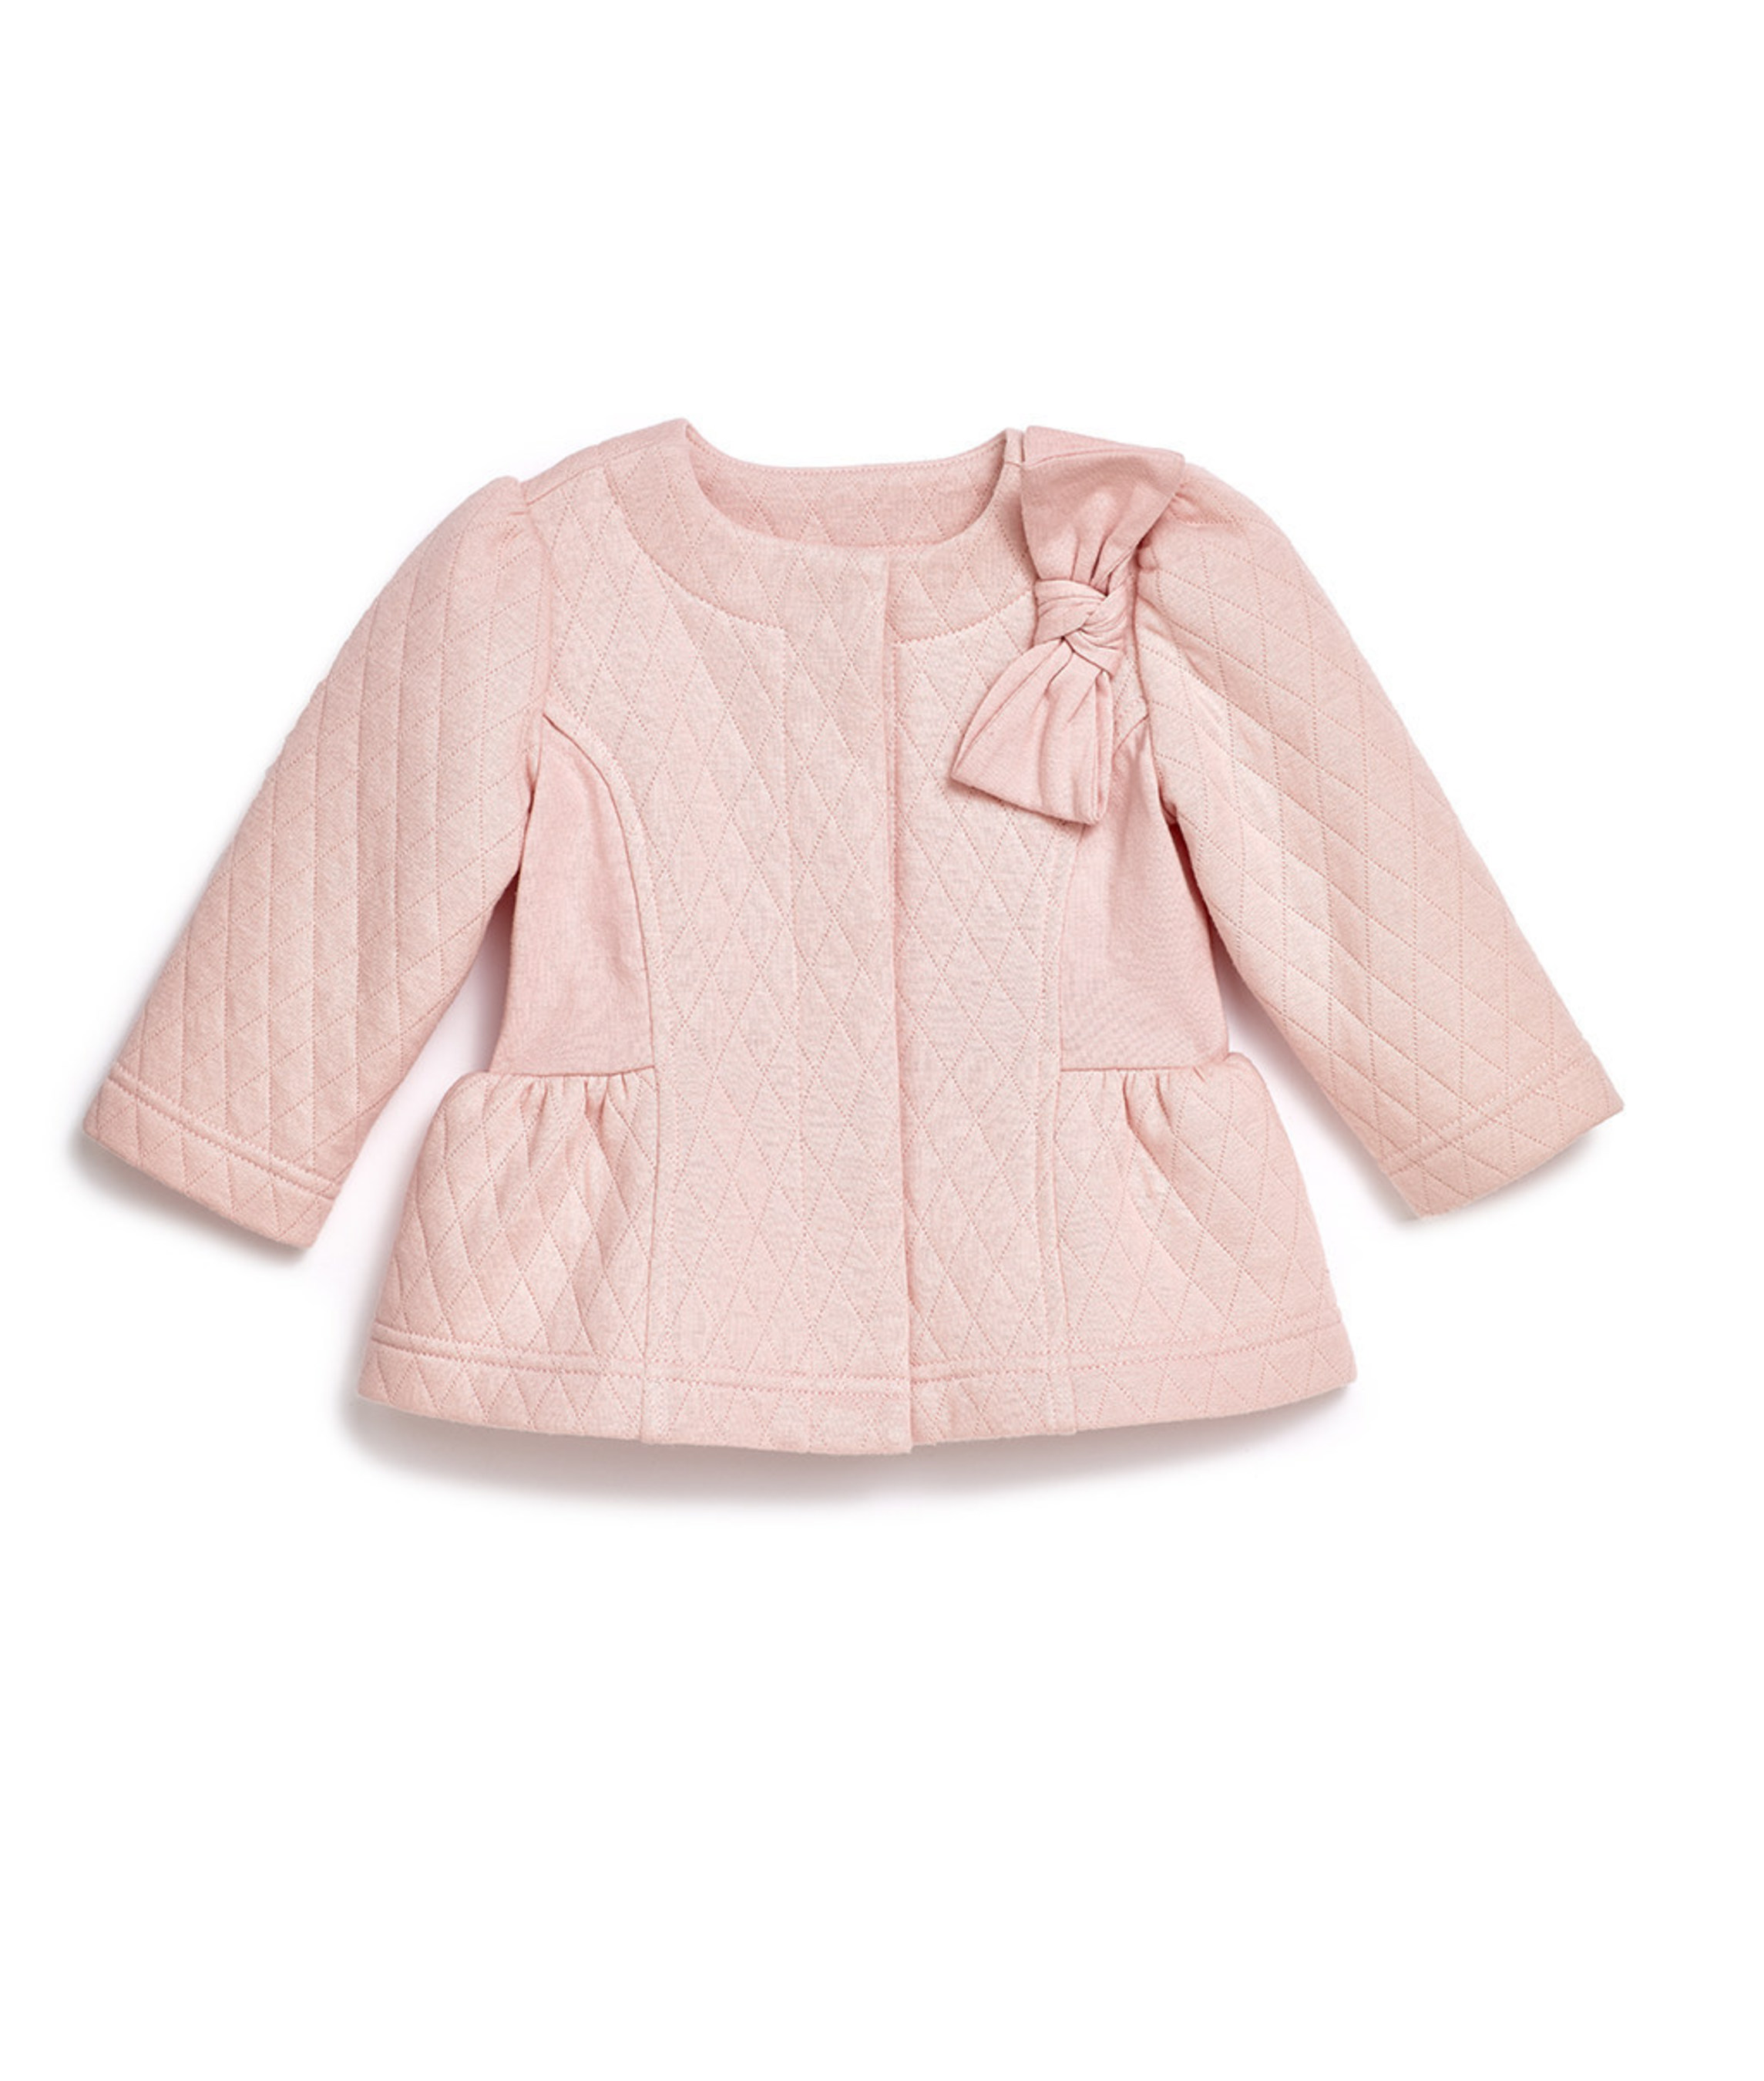 Girls Pink Quilted Jacket - T.J.Maxx